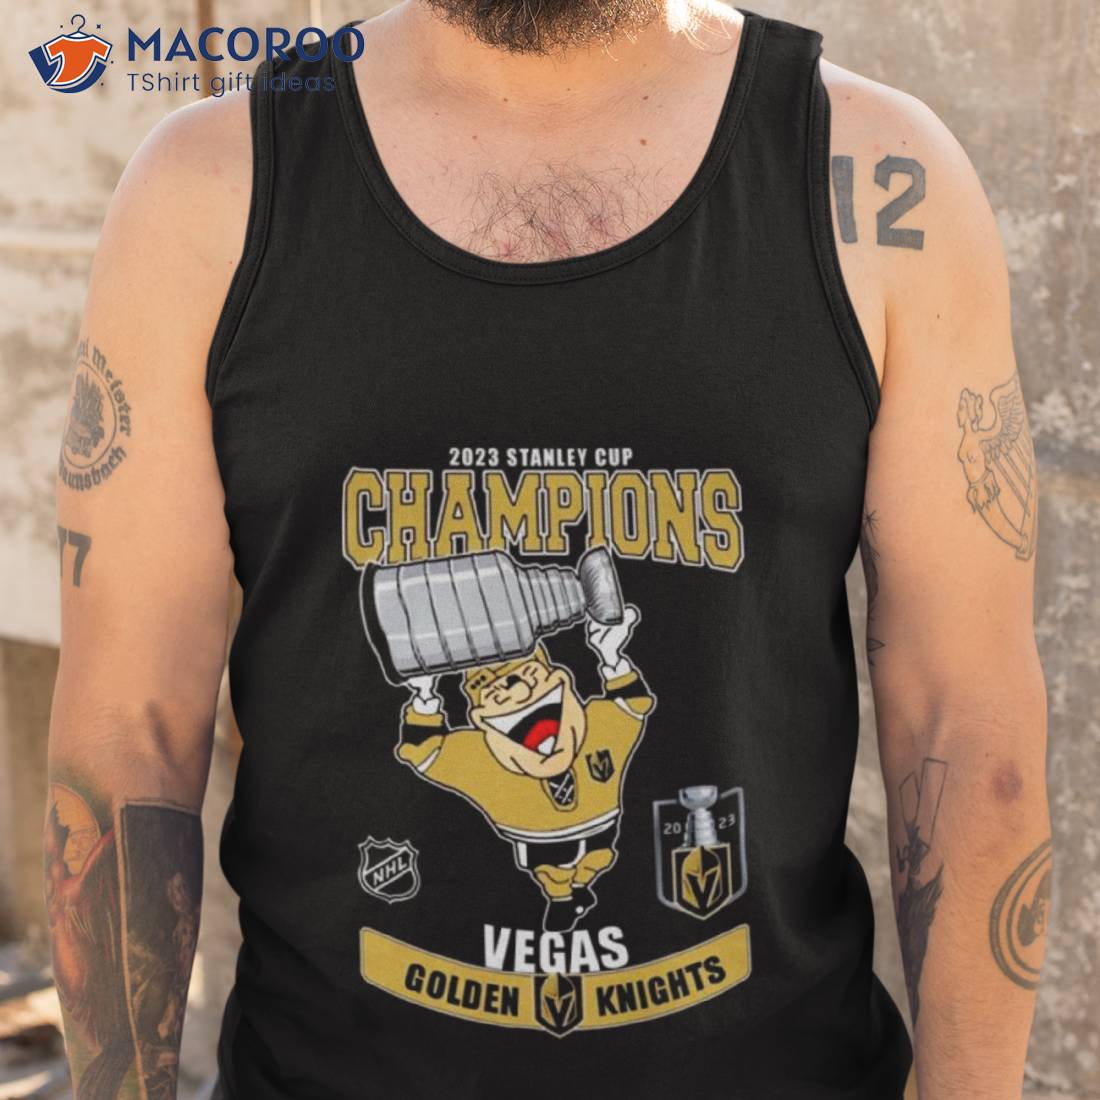 https://images.macoroo.com/wp-content/uploads/2023/06/2023-stanley-cup-champions-vegas-golden-knights-nhl-shirt-tank-top.jpg